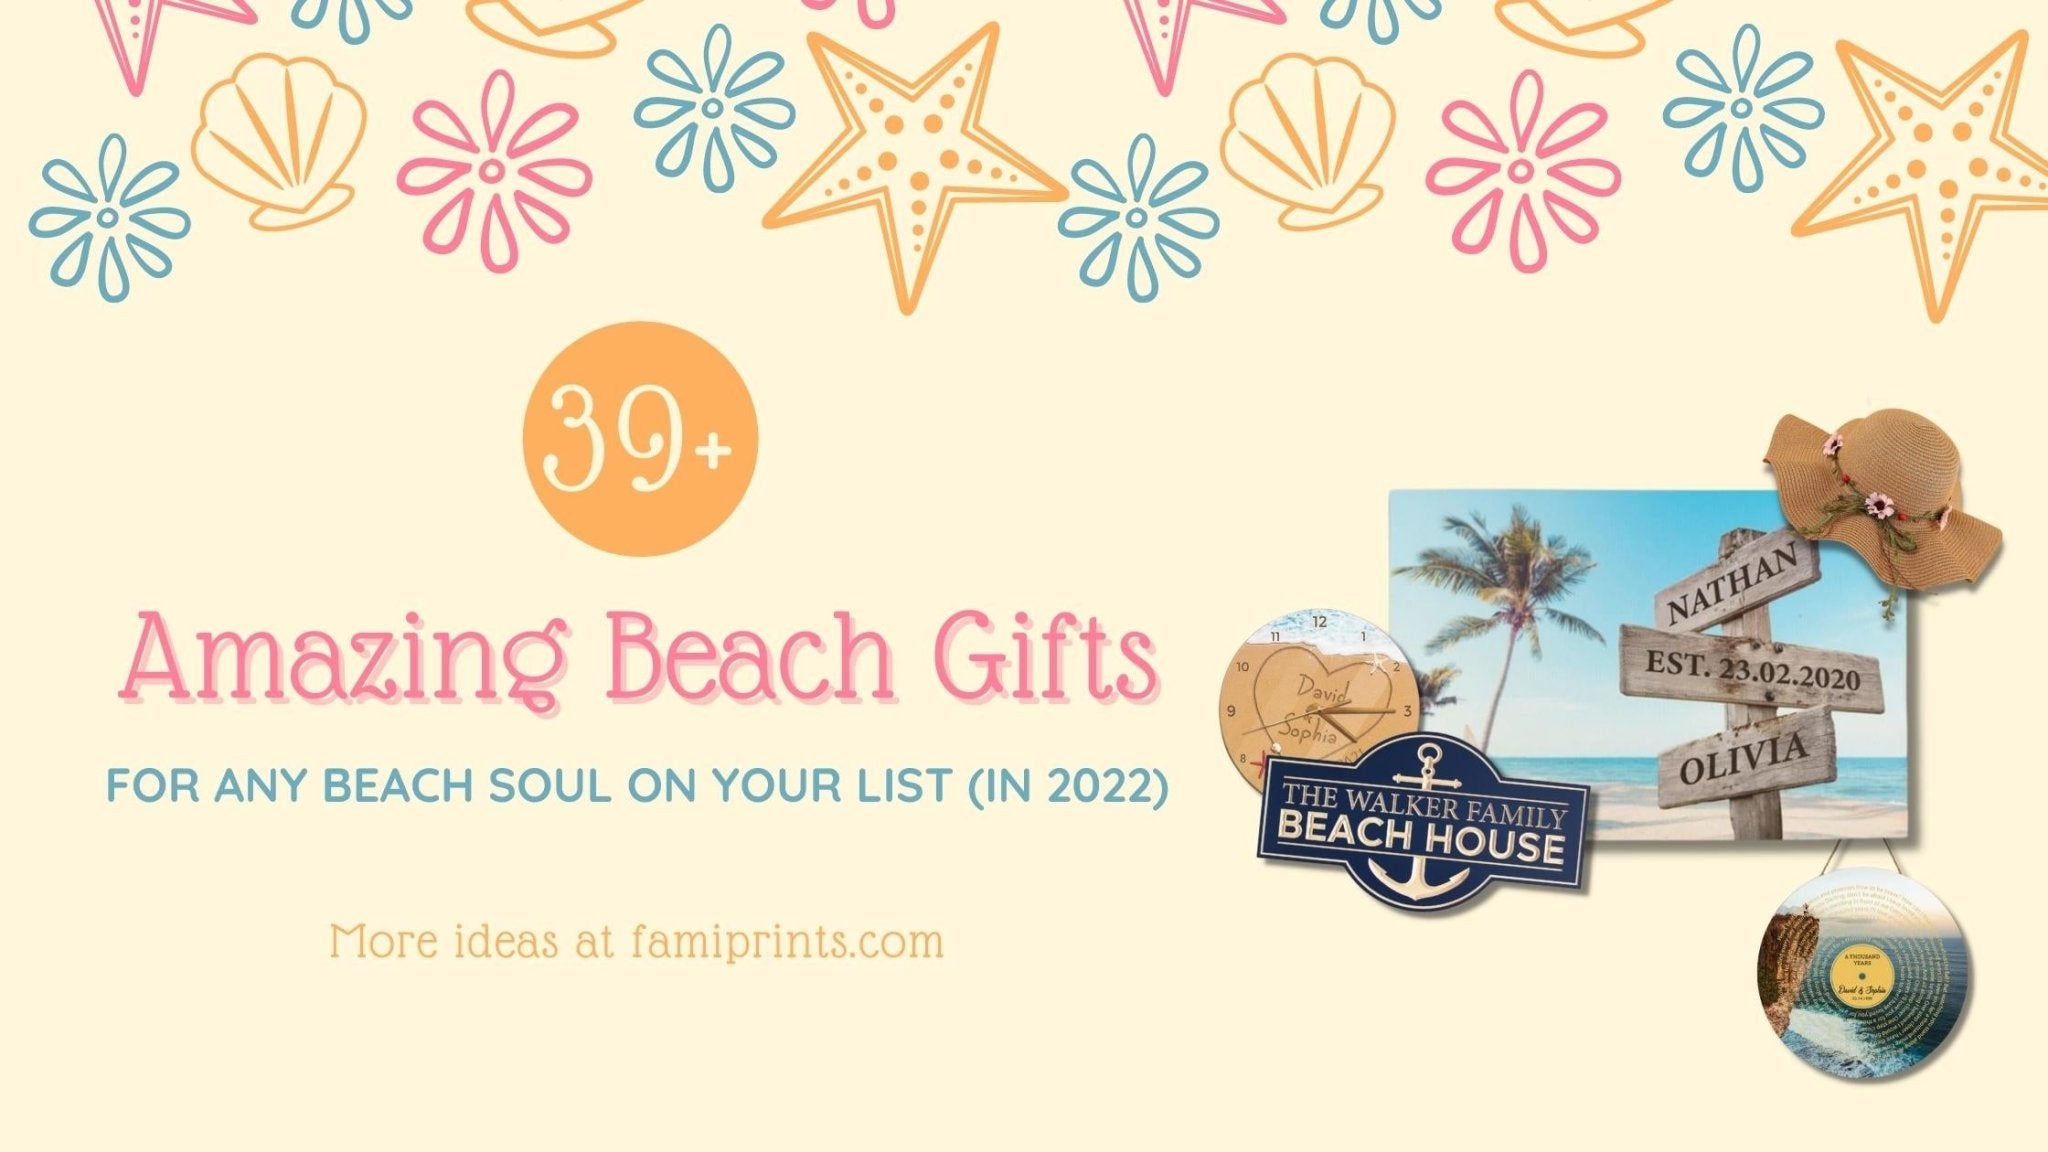 39+ Amazing Beach Gifts For Any Beach Soul On Your List (In 2022) - FamiPrints | Trending Customizable Family Gifts